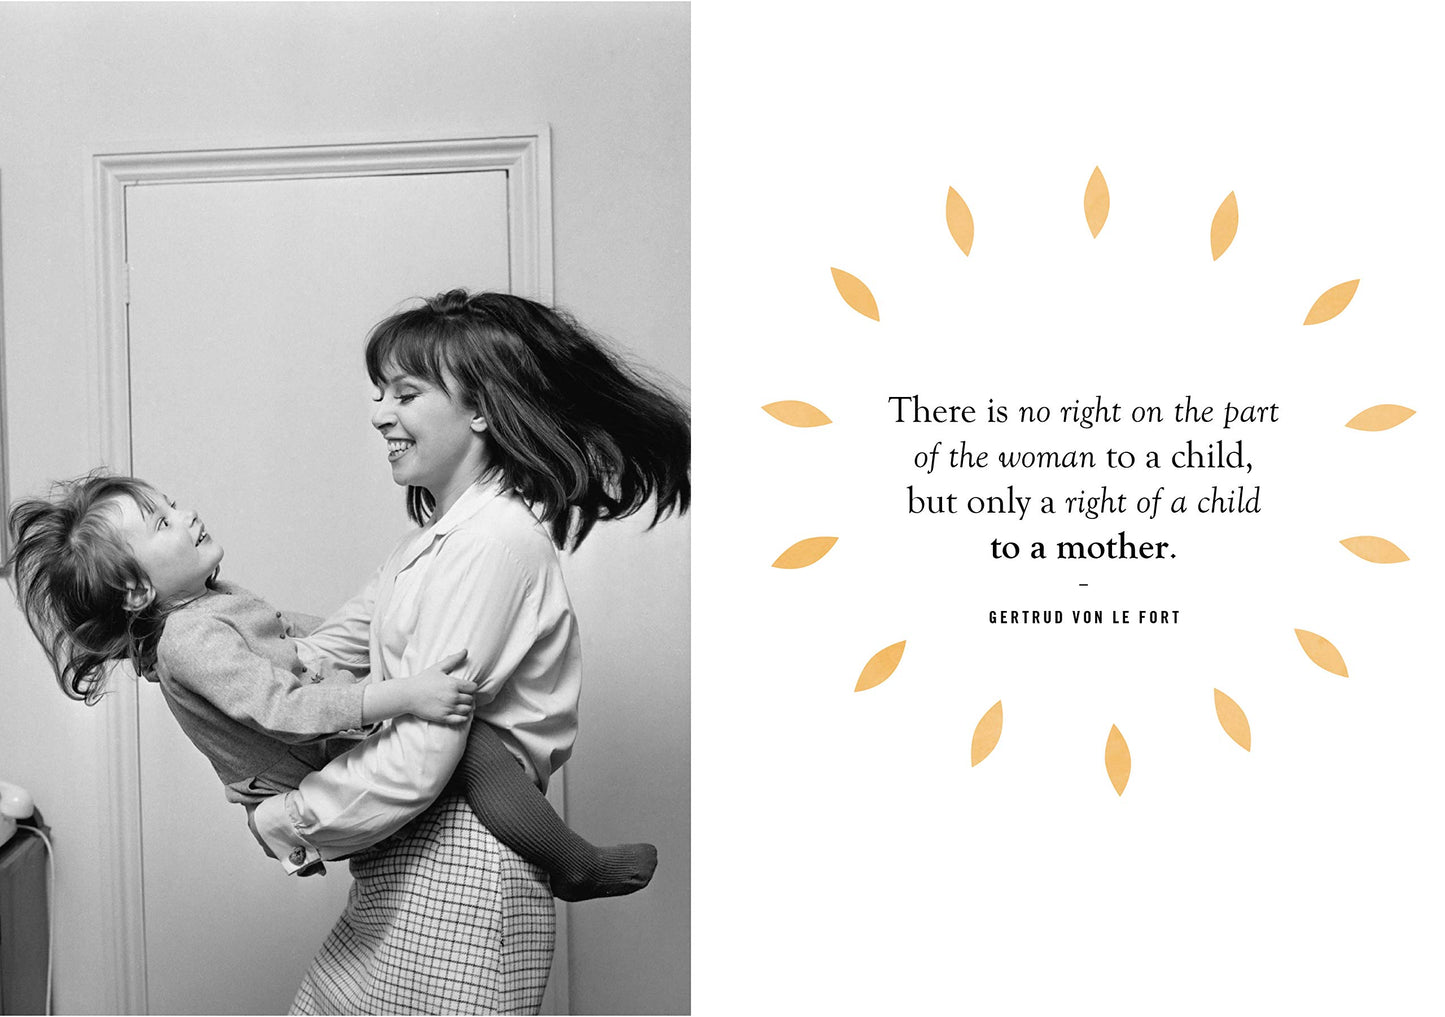 Hold My Hand: Wise Words for Mothers and Daughters Everywhere